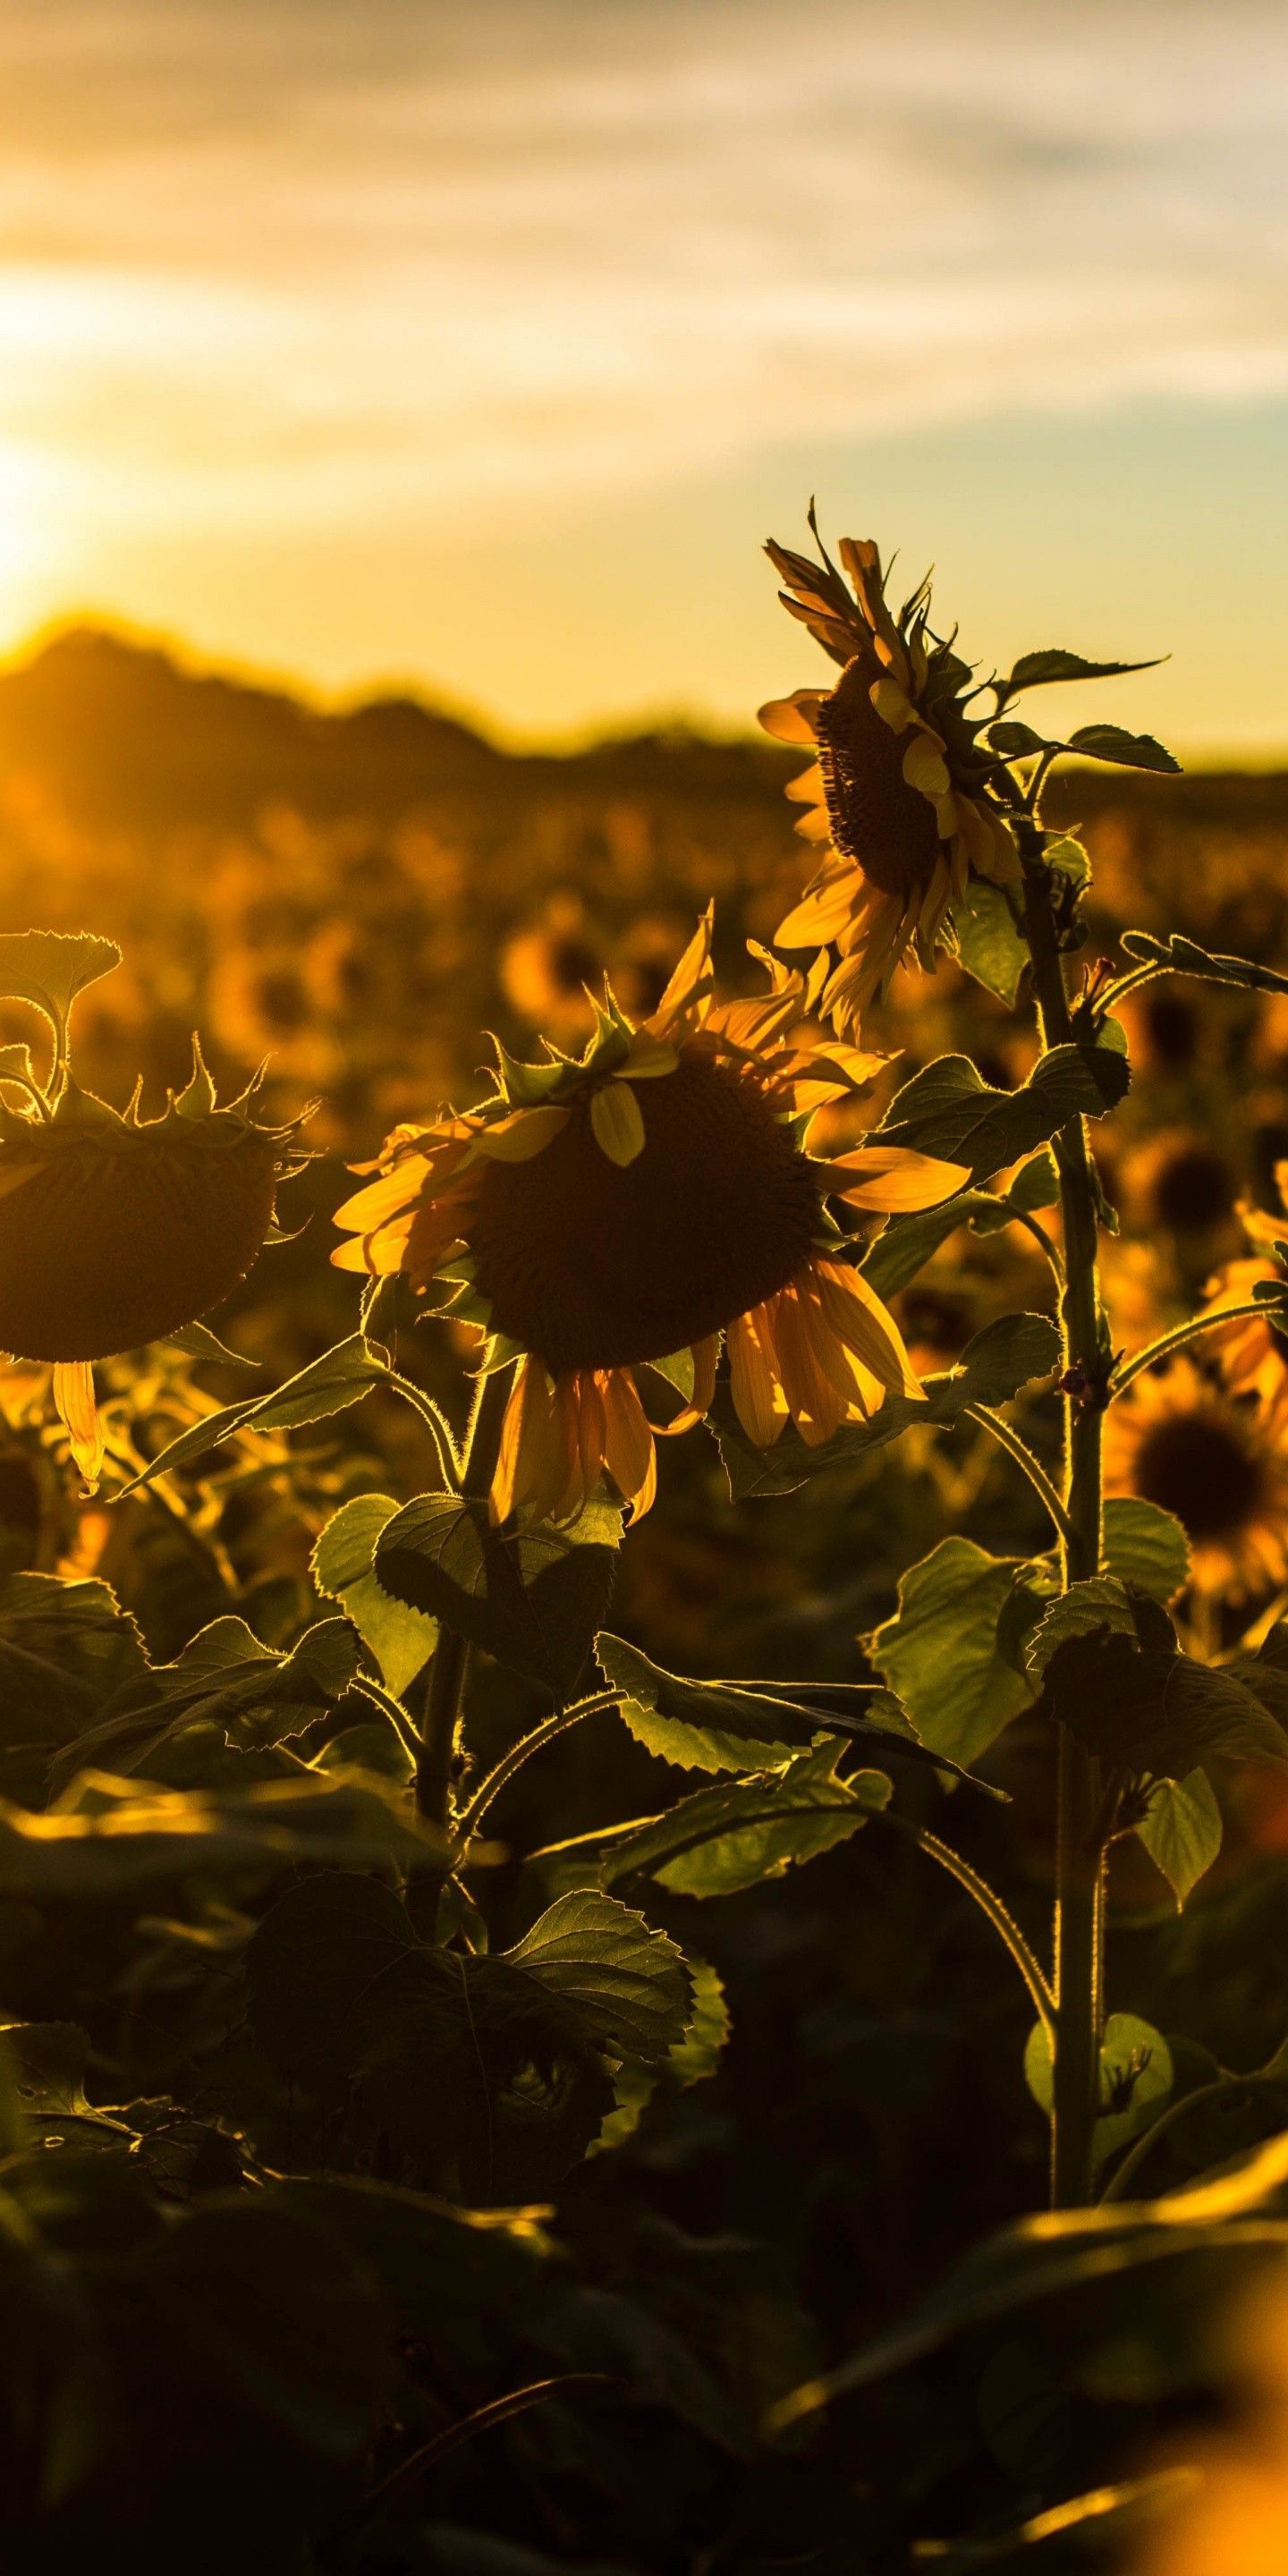 Sunflowers Field At Sunset Wallpapers - Wallpaper Cave